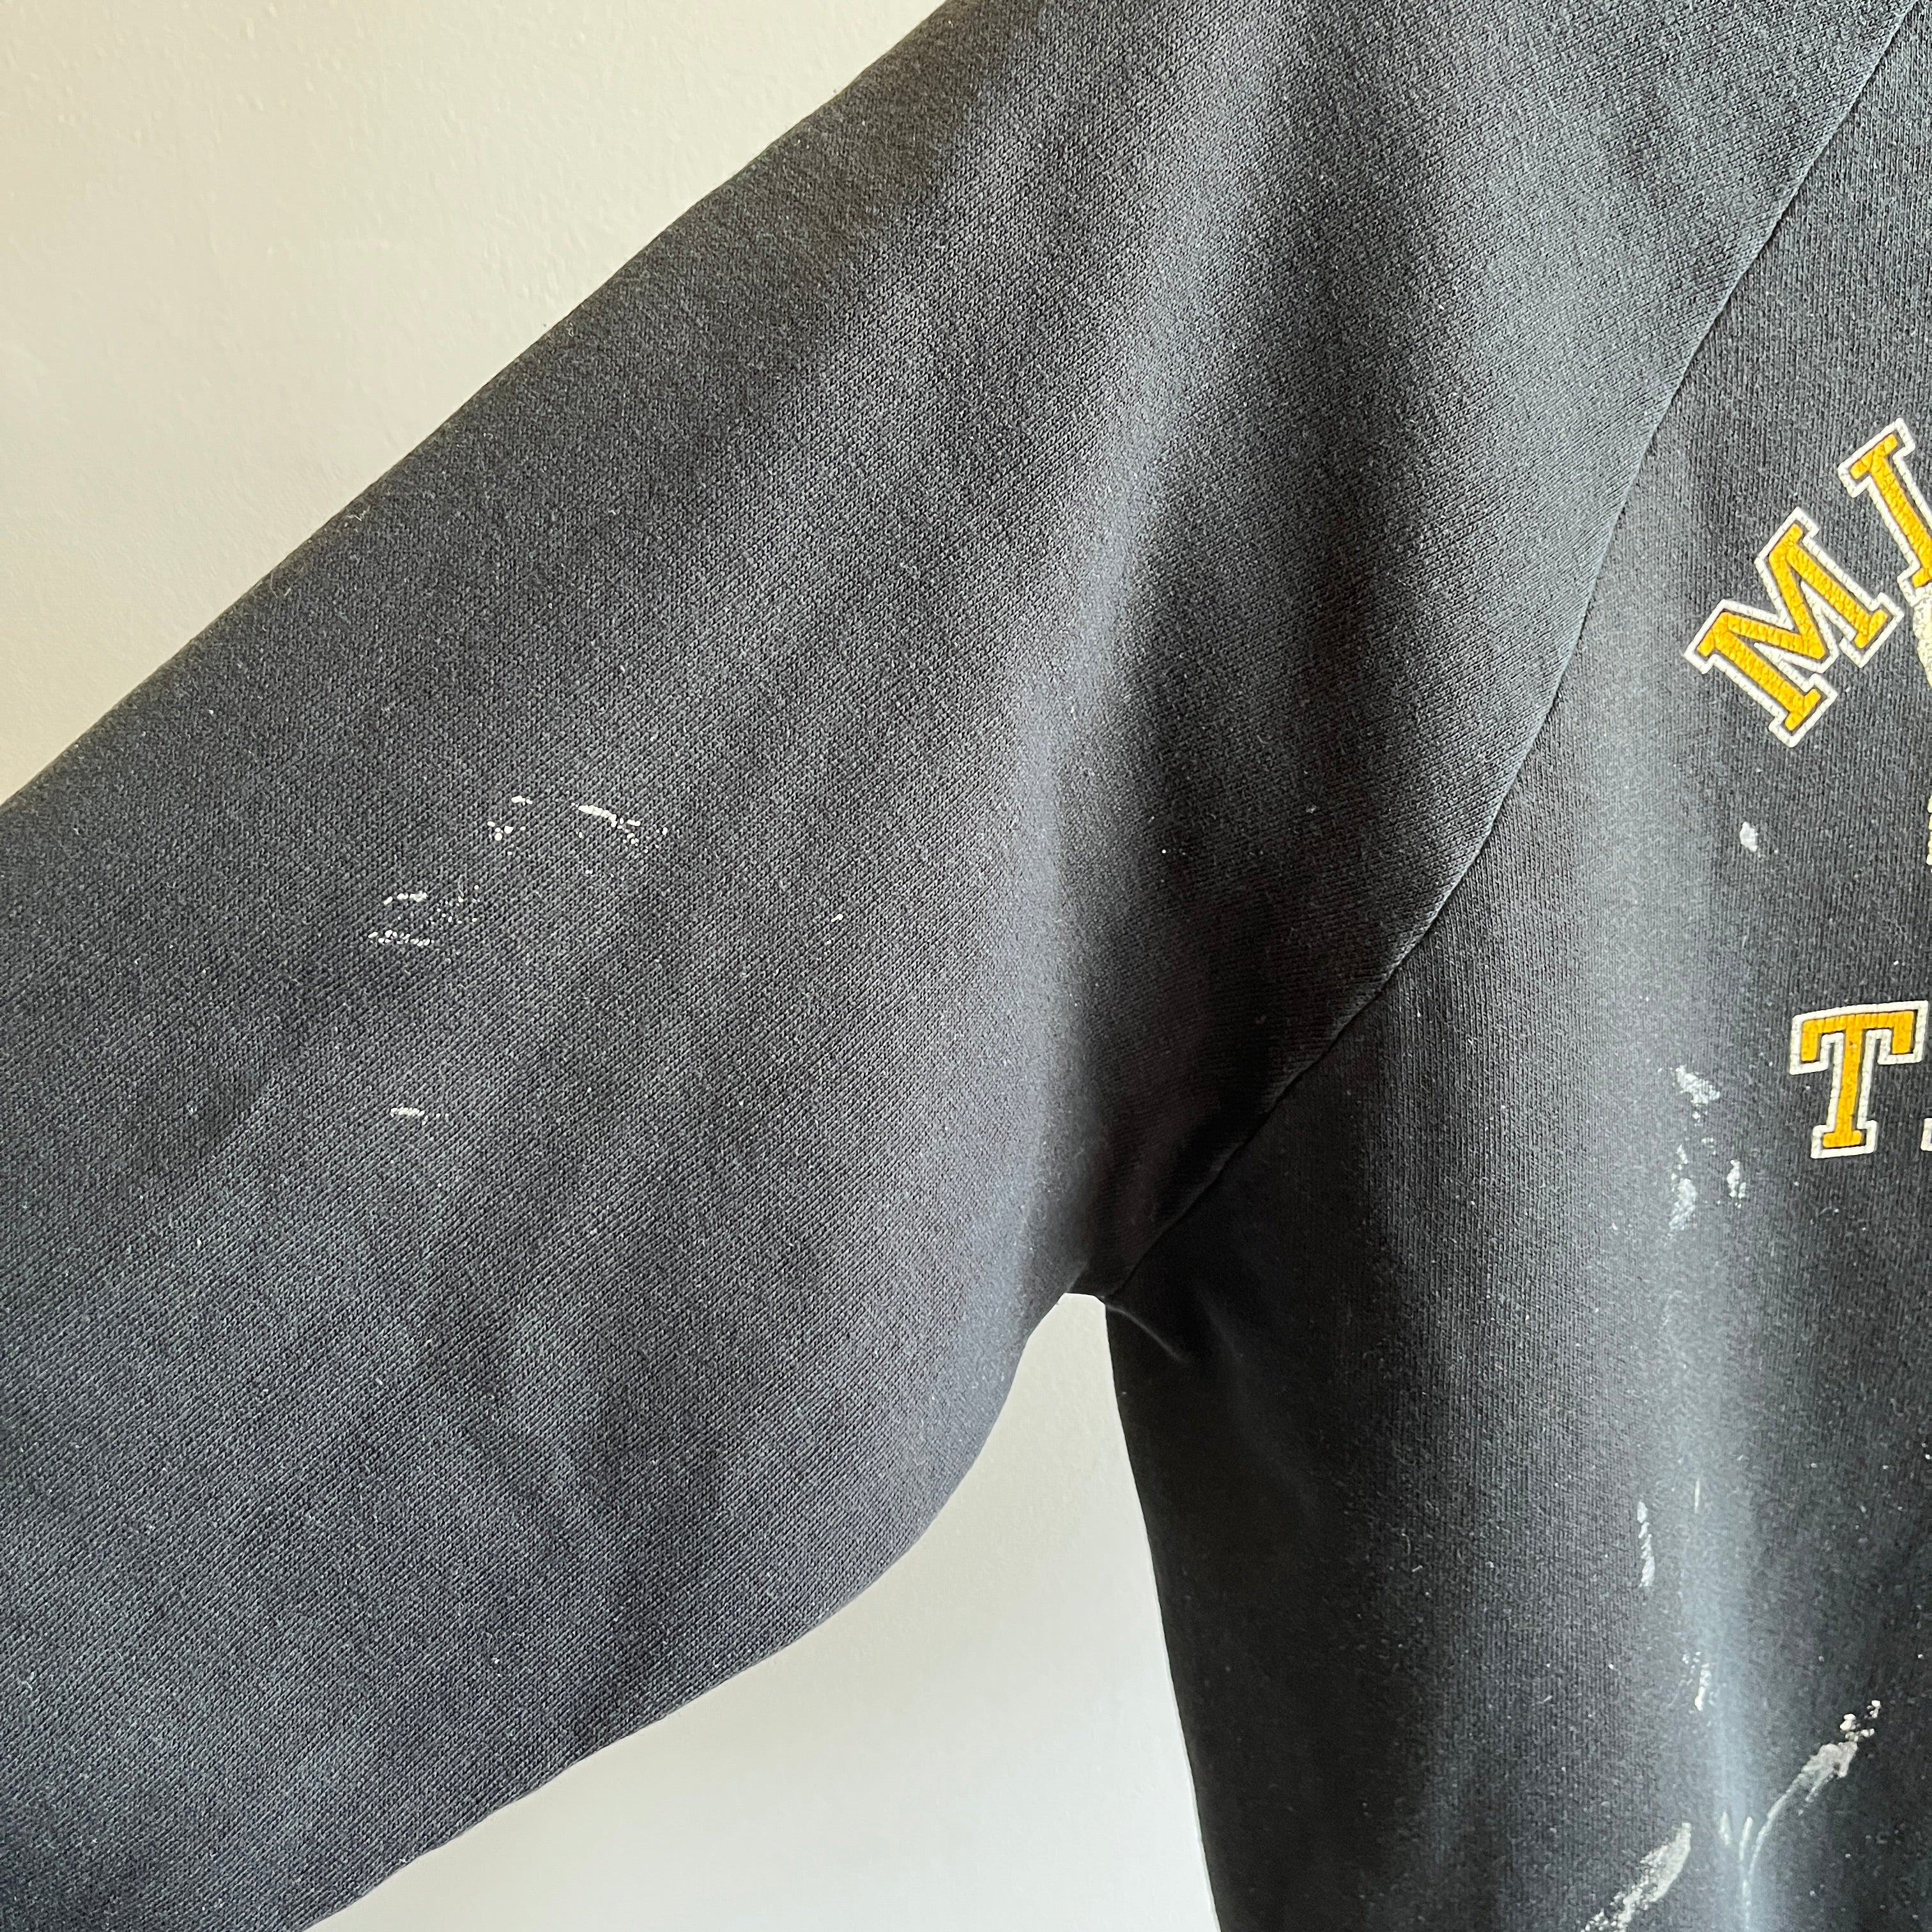 RESERVED FOR MUZZ 1970/80s Missouri Tigers Paint Stained Sweatshirt by Sportswear - Personal Collection